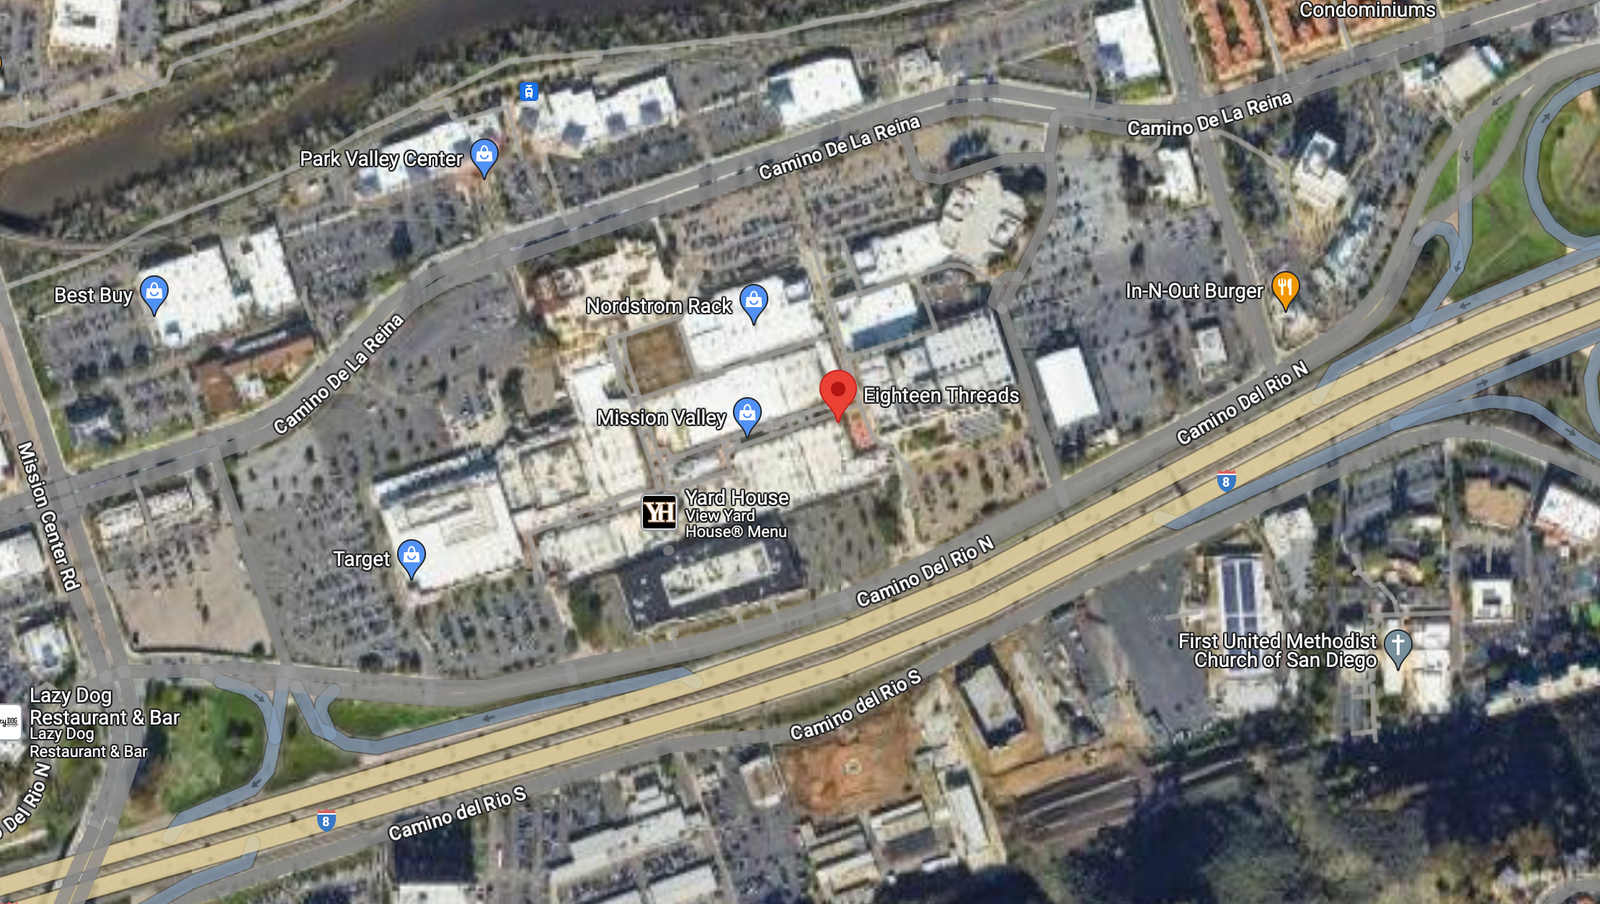 Map of Mission Valley Mall and Eighteen Threads